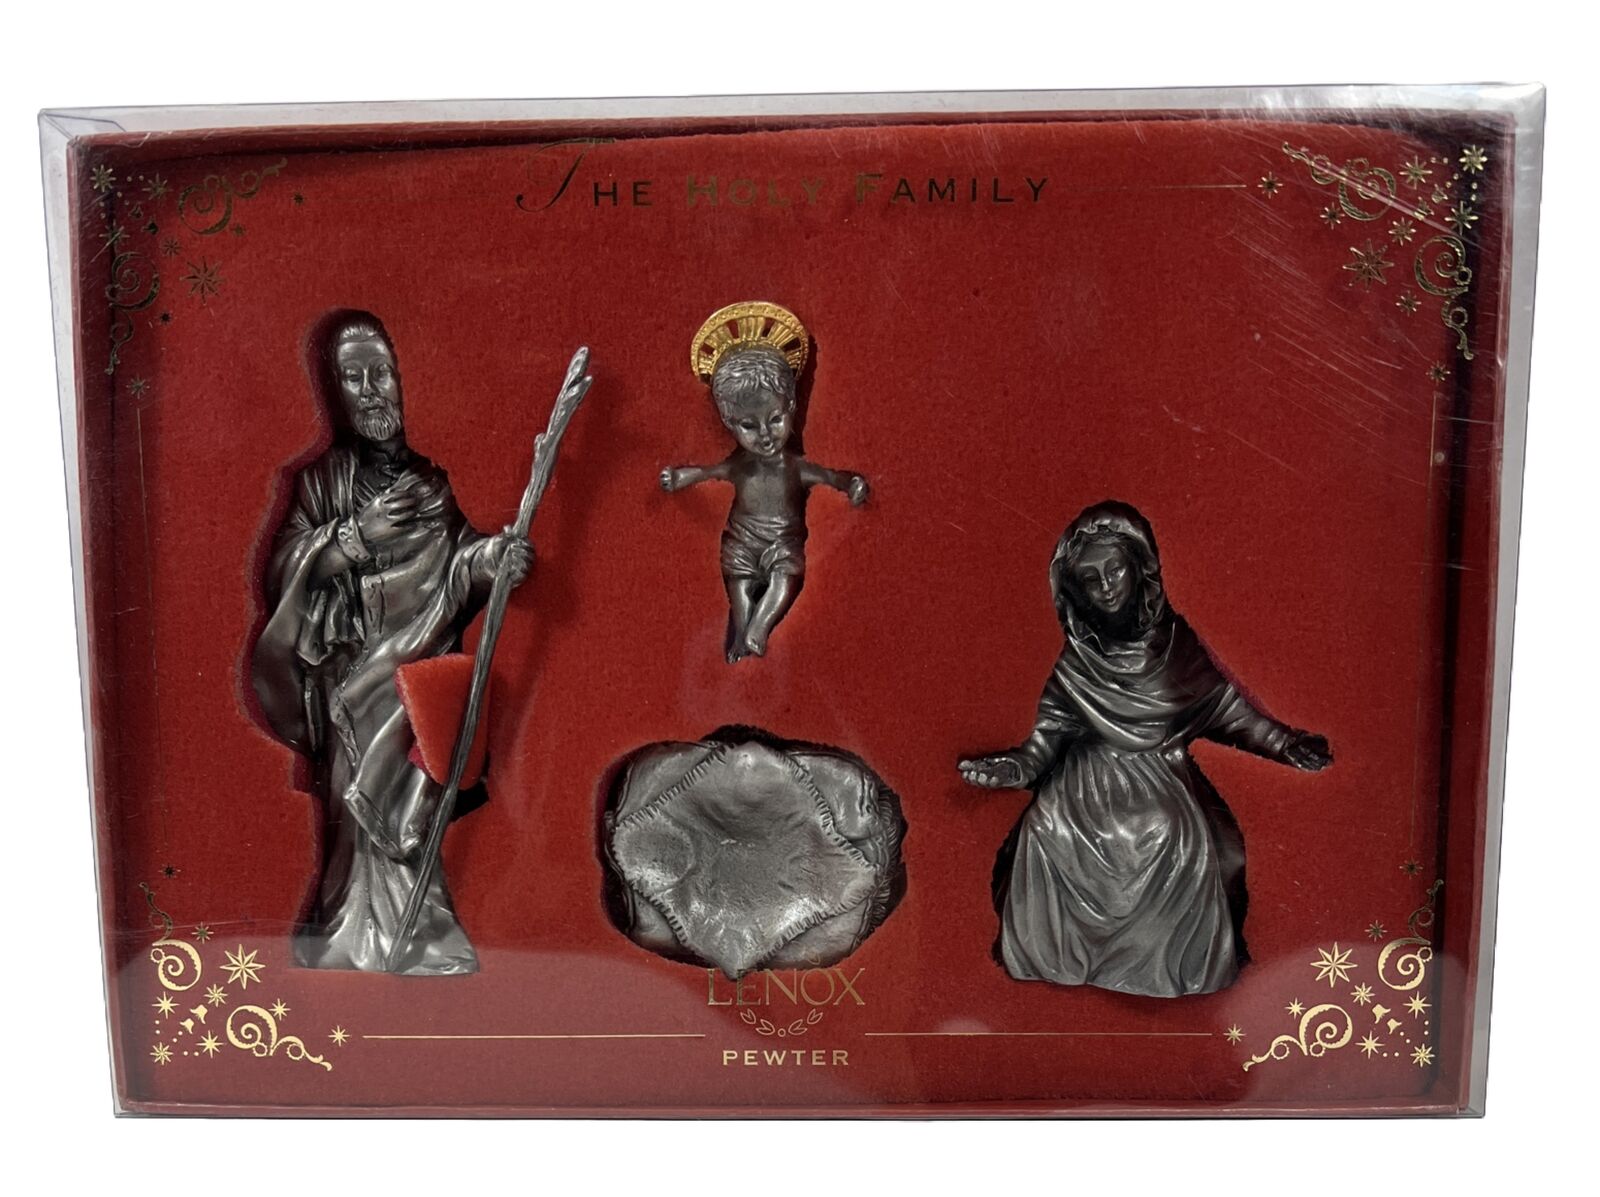 LENOX PEWTER Holy Family Nativity Figure Set~4pc~Kirk Stieff Collection w/ Box